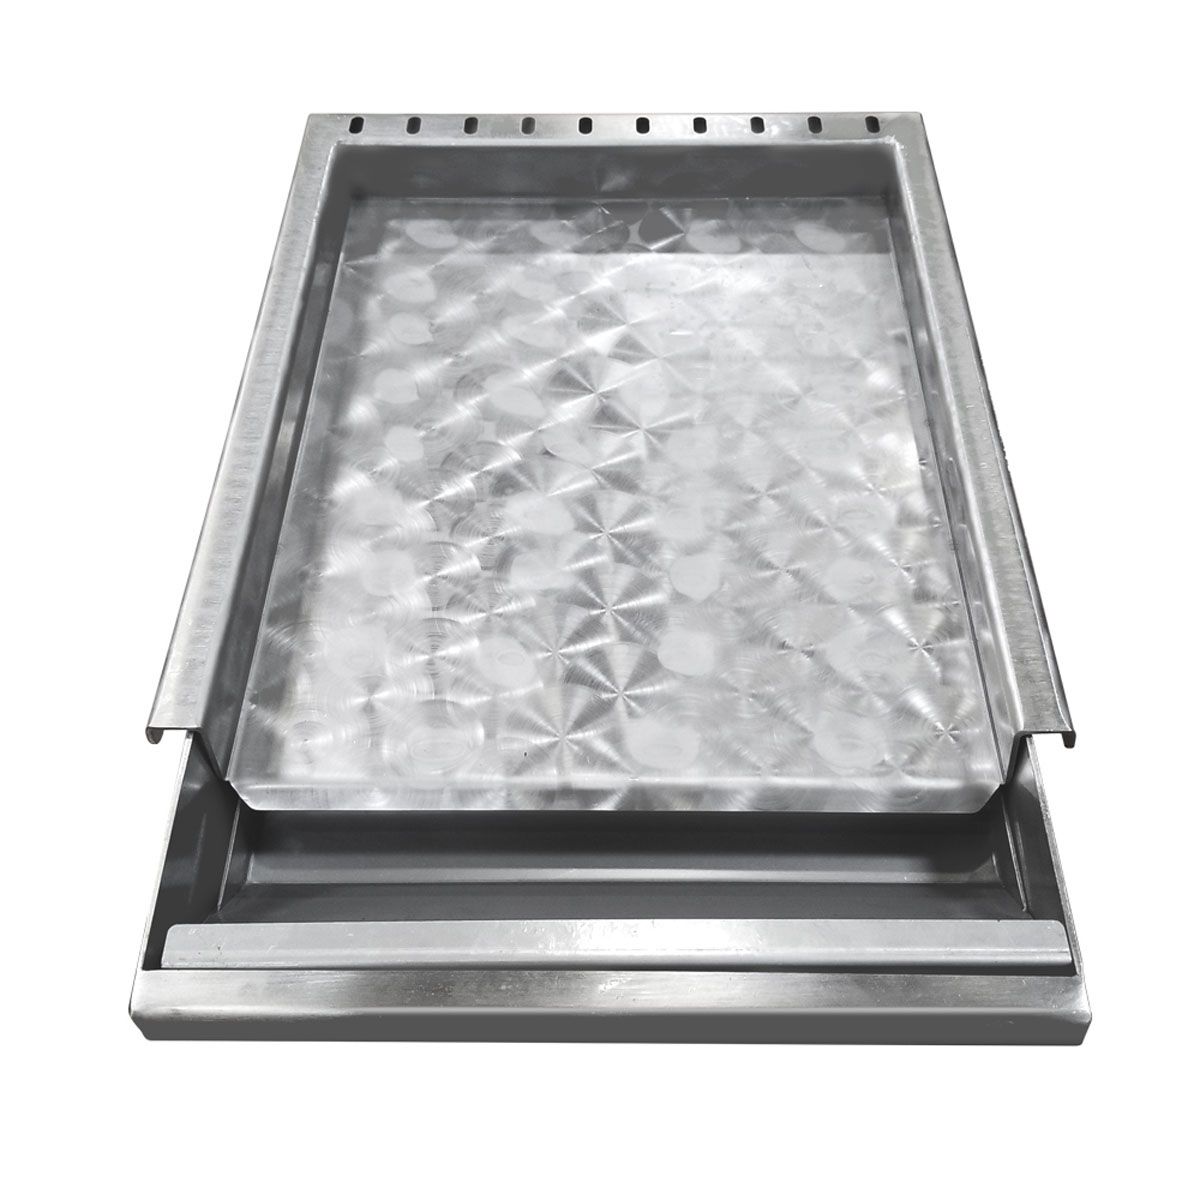 https://www.bbqgalore.com/media/catalog/product/cache/b88e2046abccba1825a9f88b9582eb4f/2/0/2019-griddle-plate-front.jpg